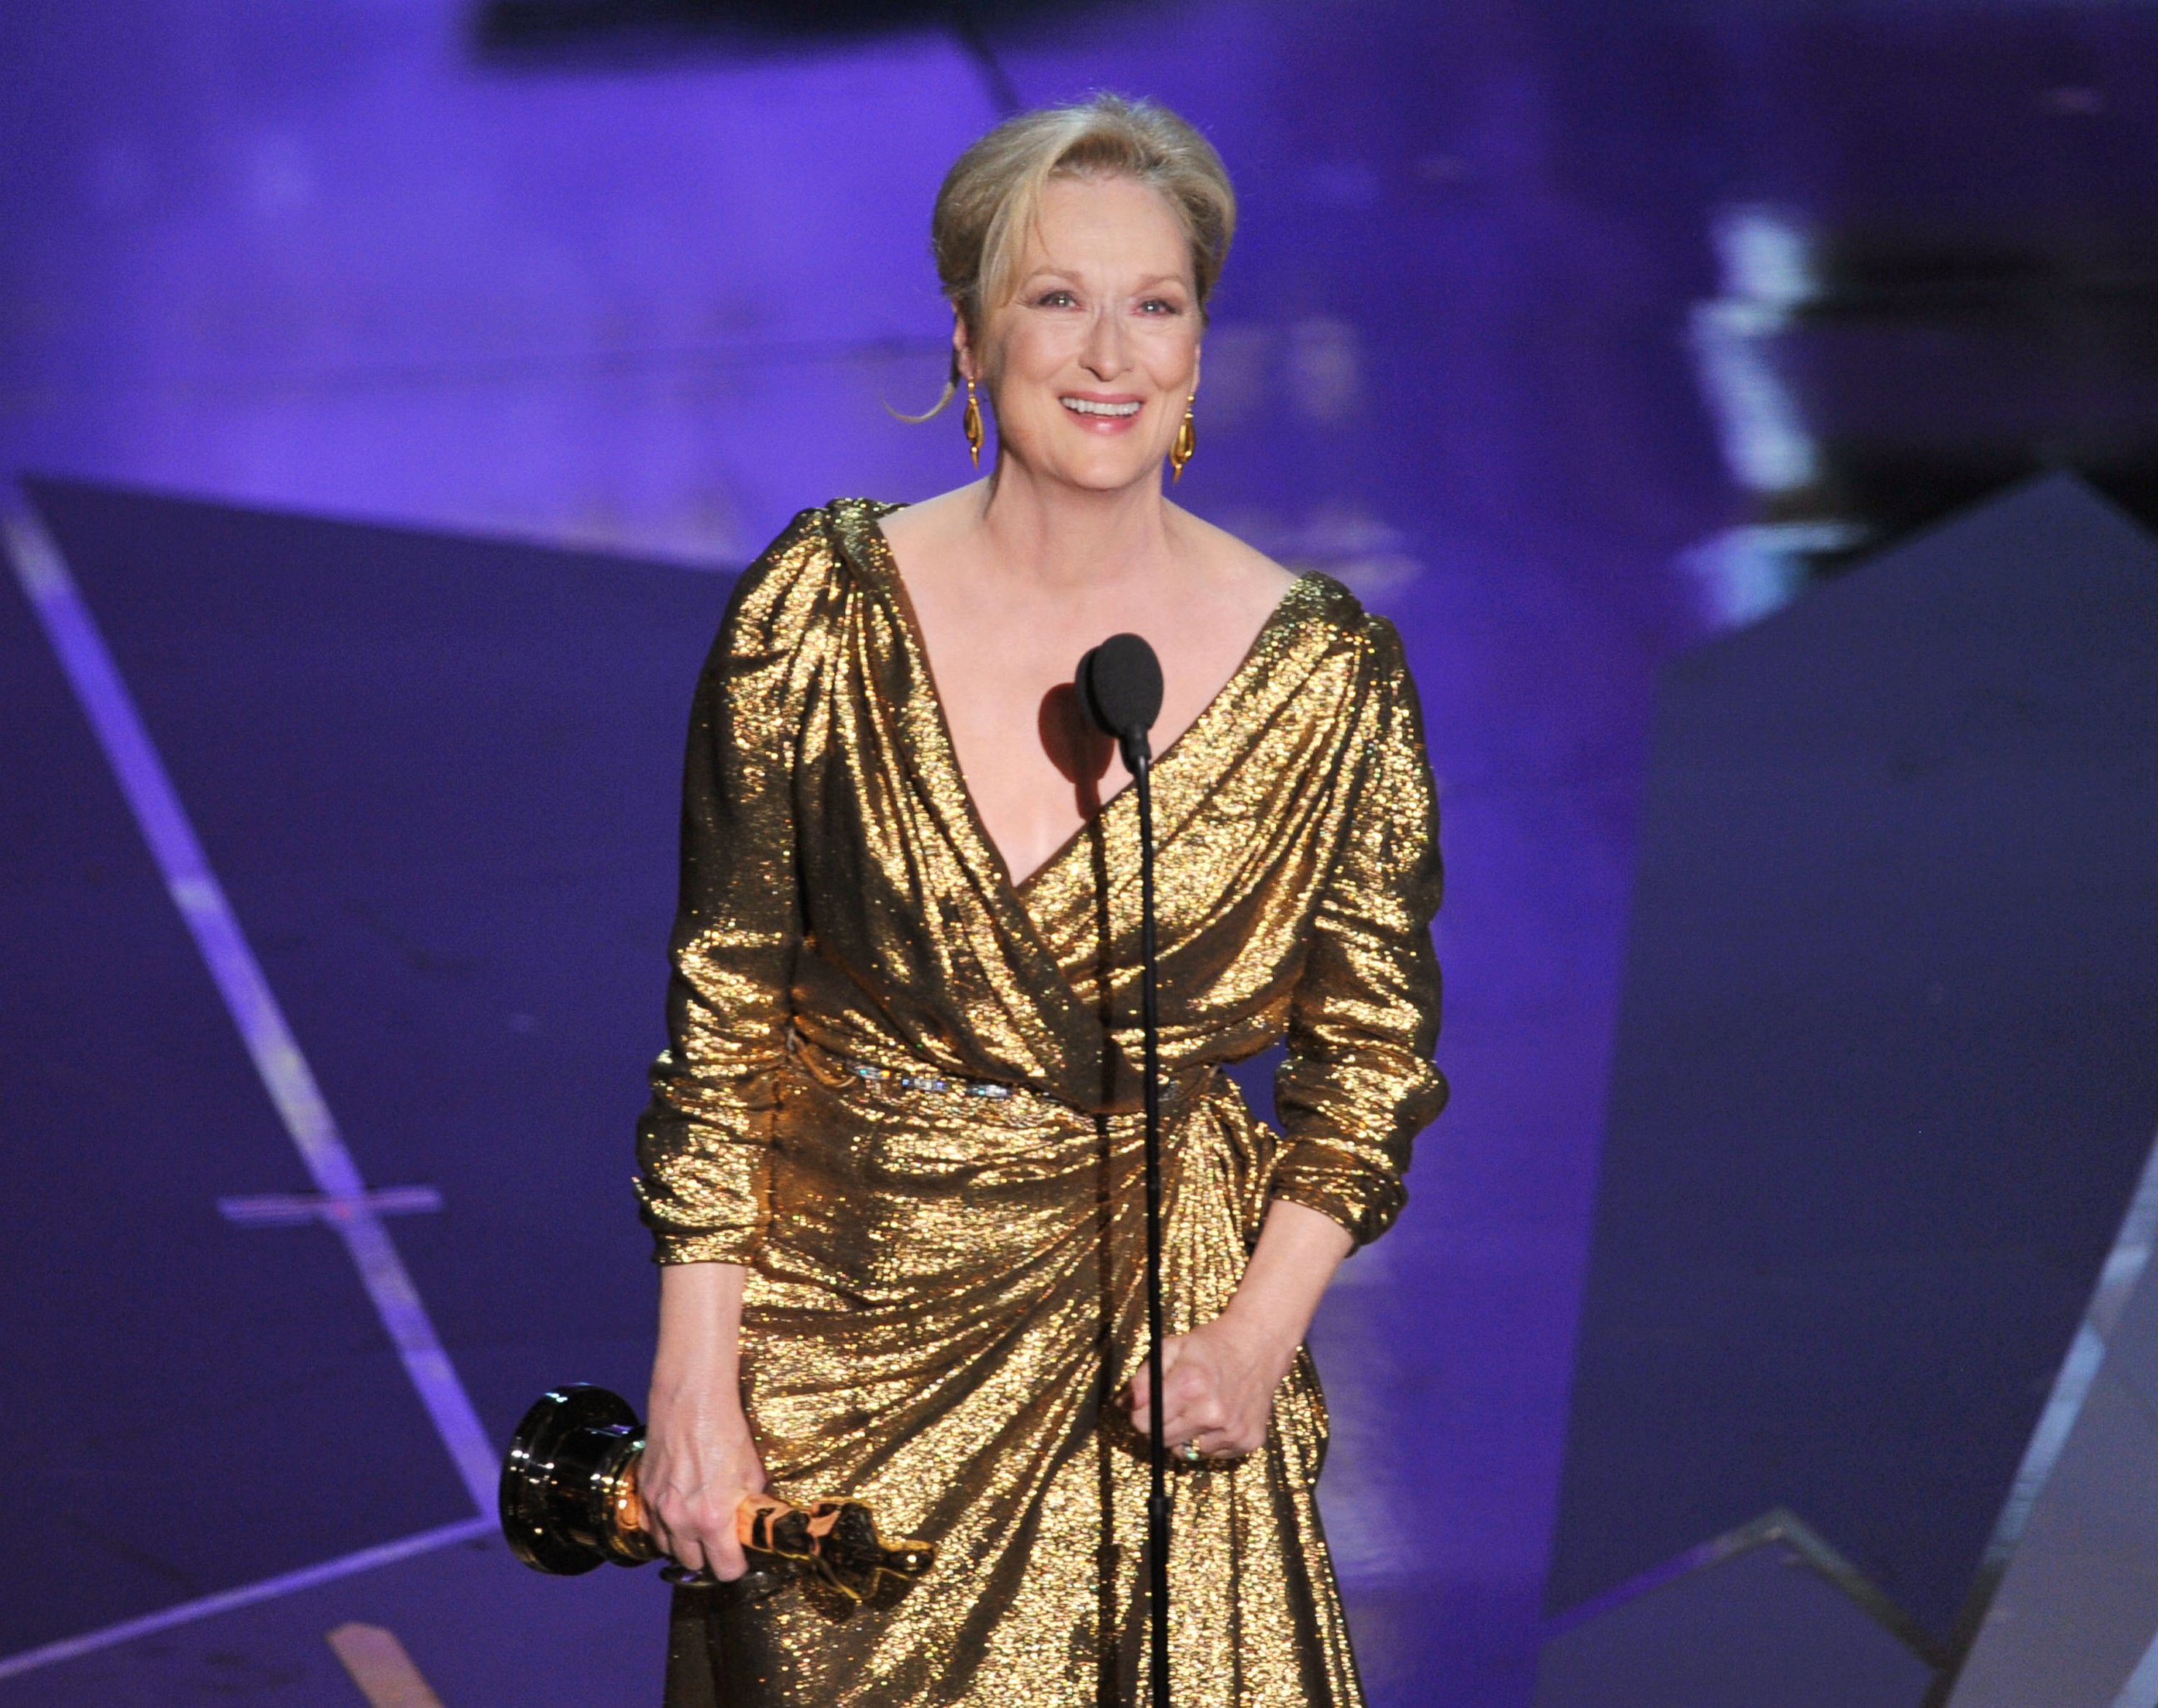 PHOTO: Actress Meryl Streep accepts the Best Actress Award for "The Iron Lady" onstage during the 84th Annual Academy Awards held at the Hollywood & Highland Center, on Feb. 26, 2012, in Hollywood, California. 